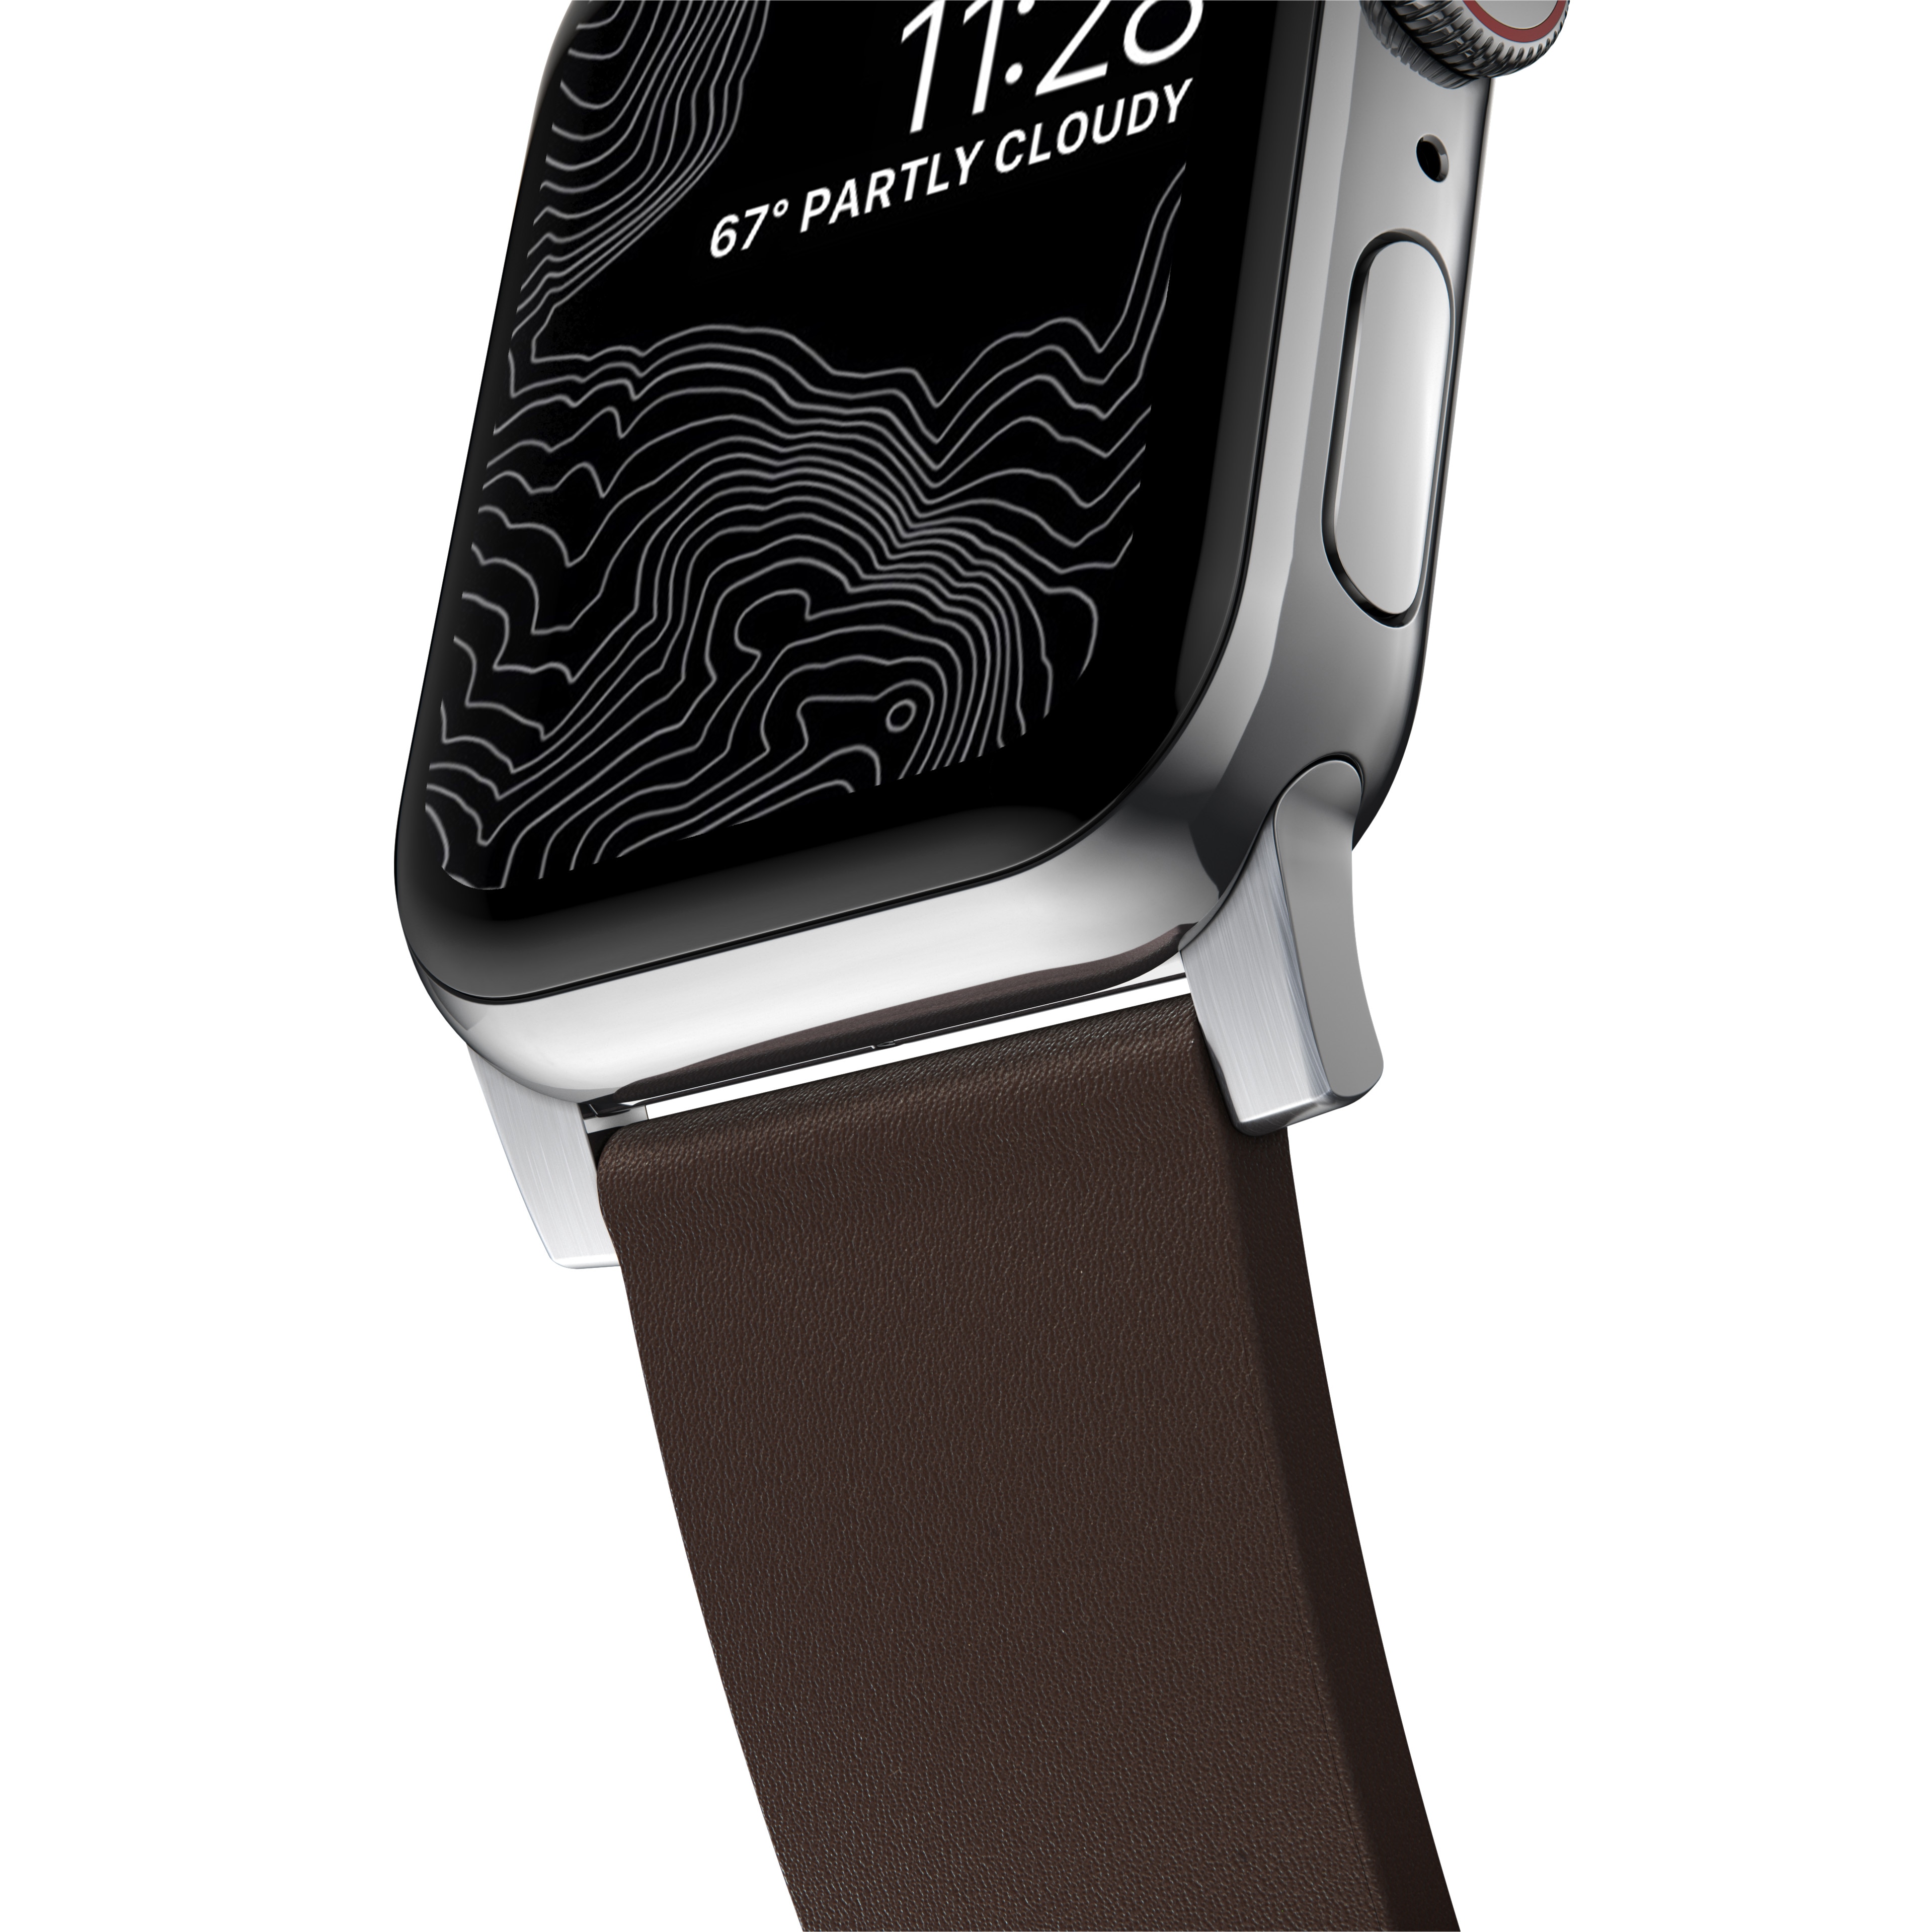 Active Band Pro Apple Watch 42mm Classic Brown (Silver Hardware)